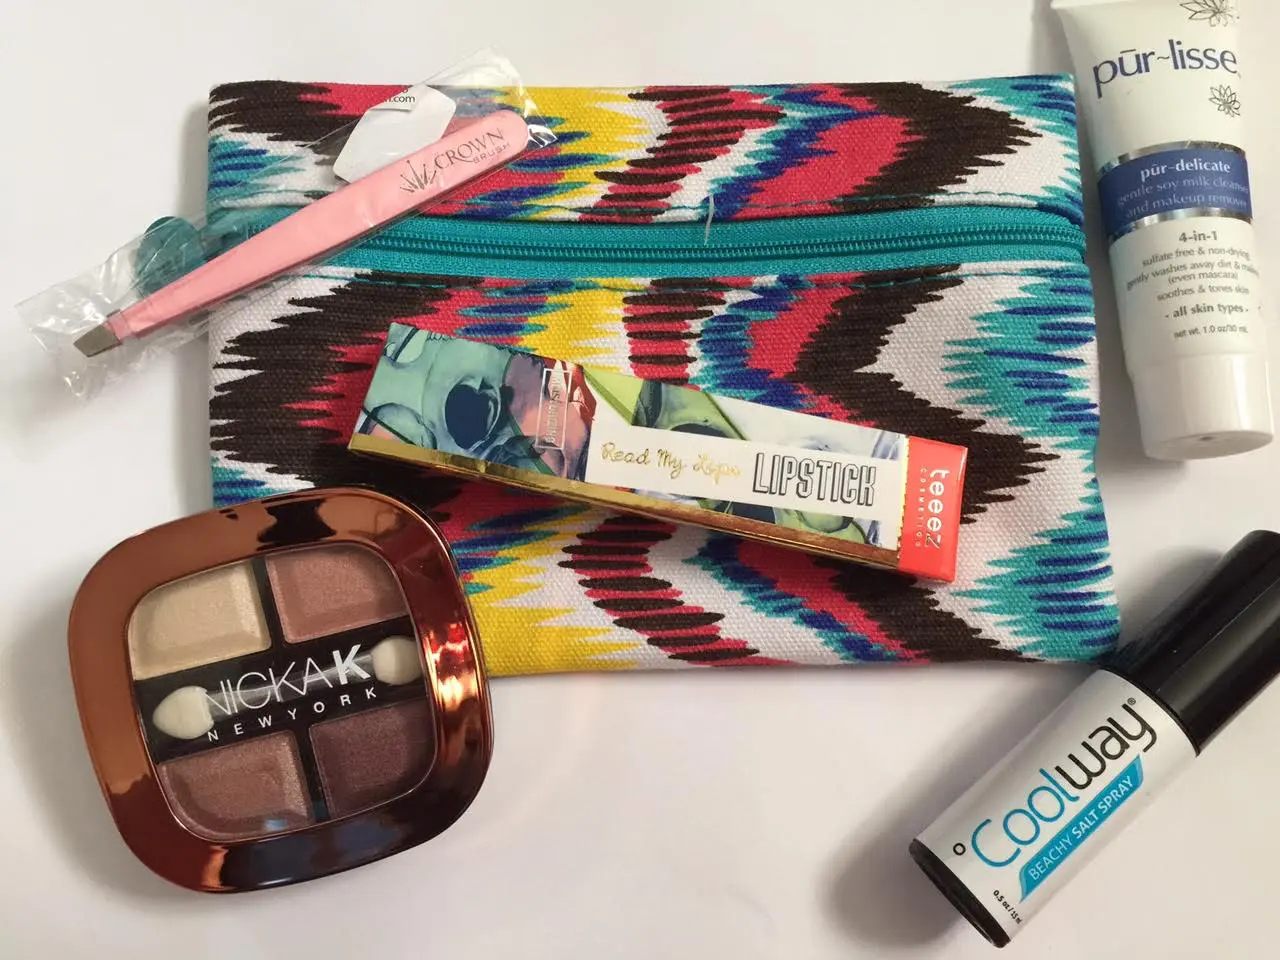 Ipsy Glam Bag Reveal July 2015 #beauty #ipsy #makeup #style